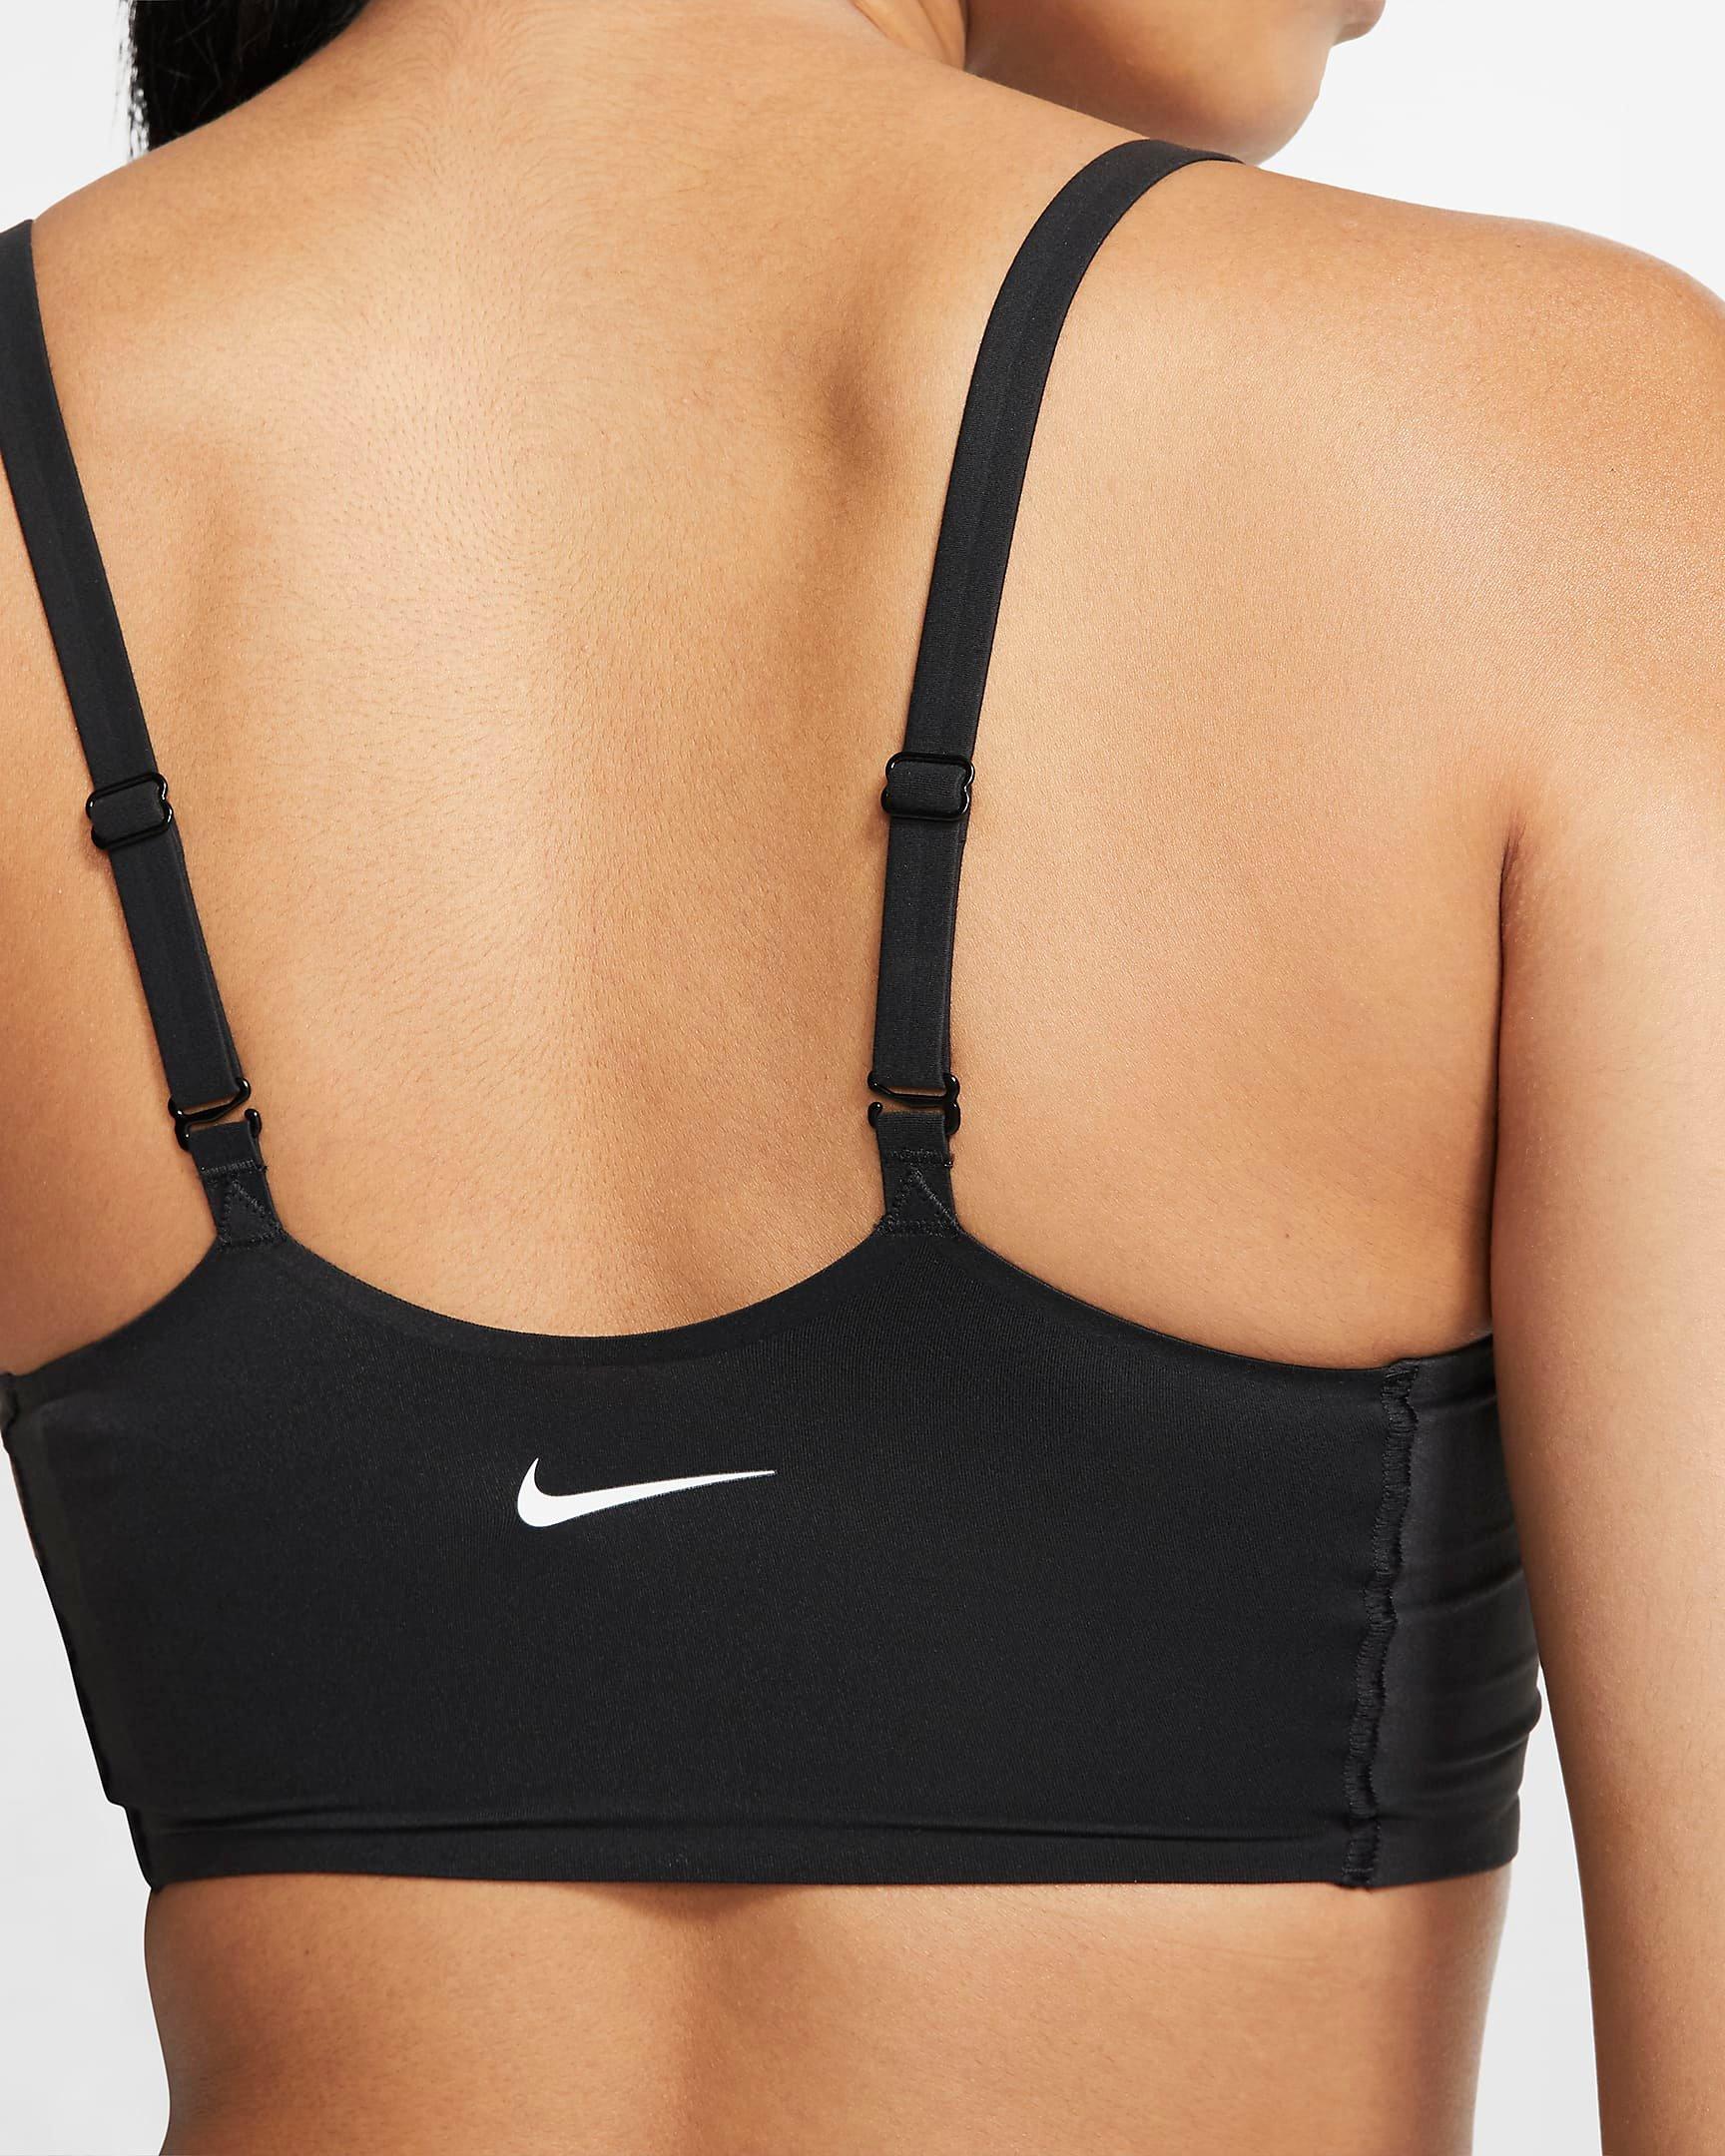 Nike Women's Light-Support Padded Convertible Indy Luxe Sports Bra